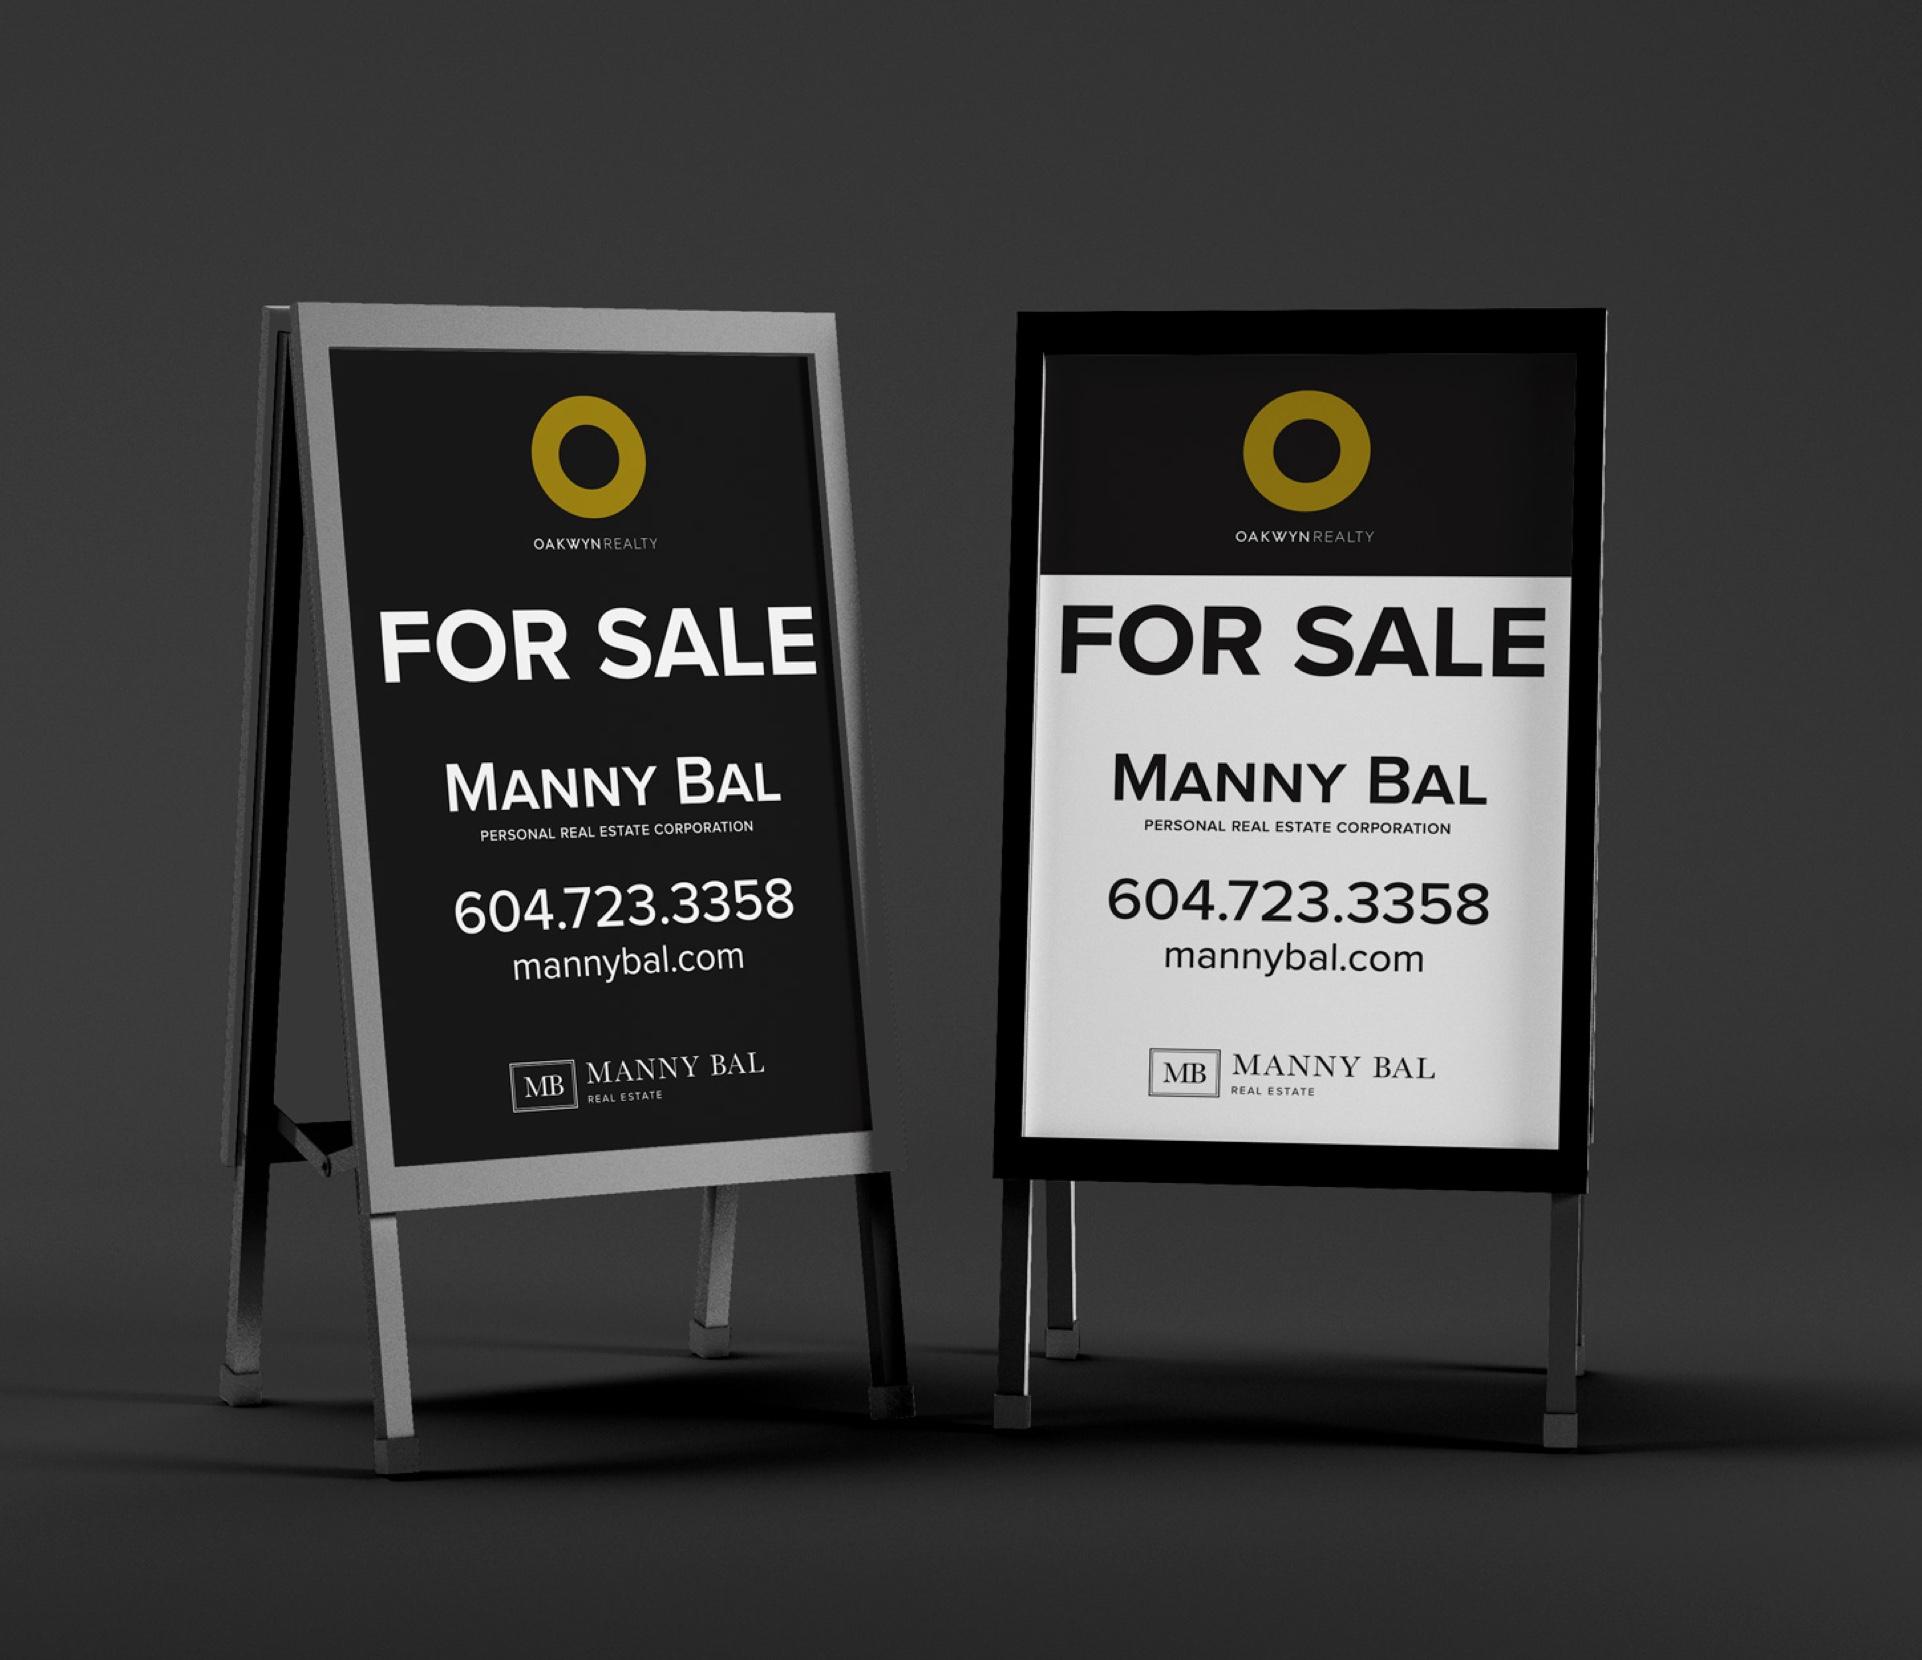 Mockup of Manny Bal's For Sale signs in a foldable sandwich board